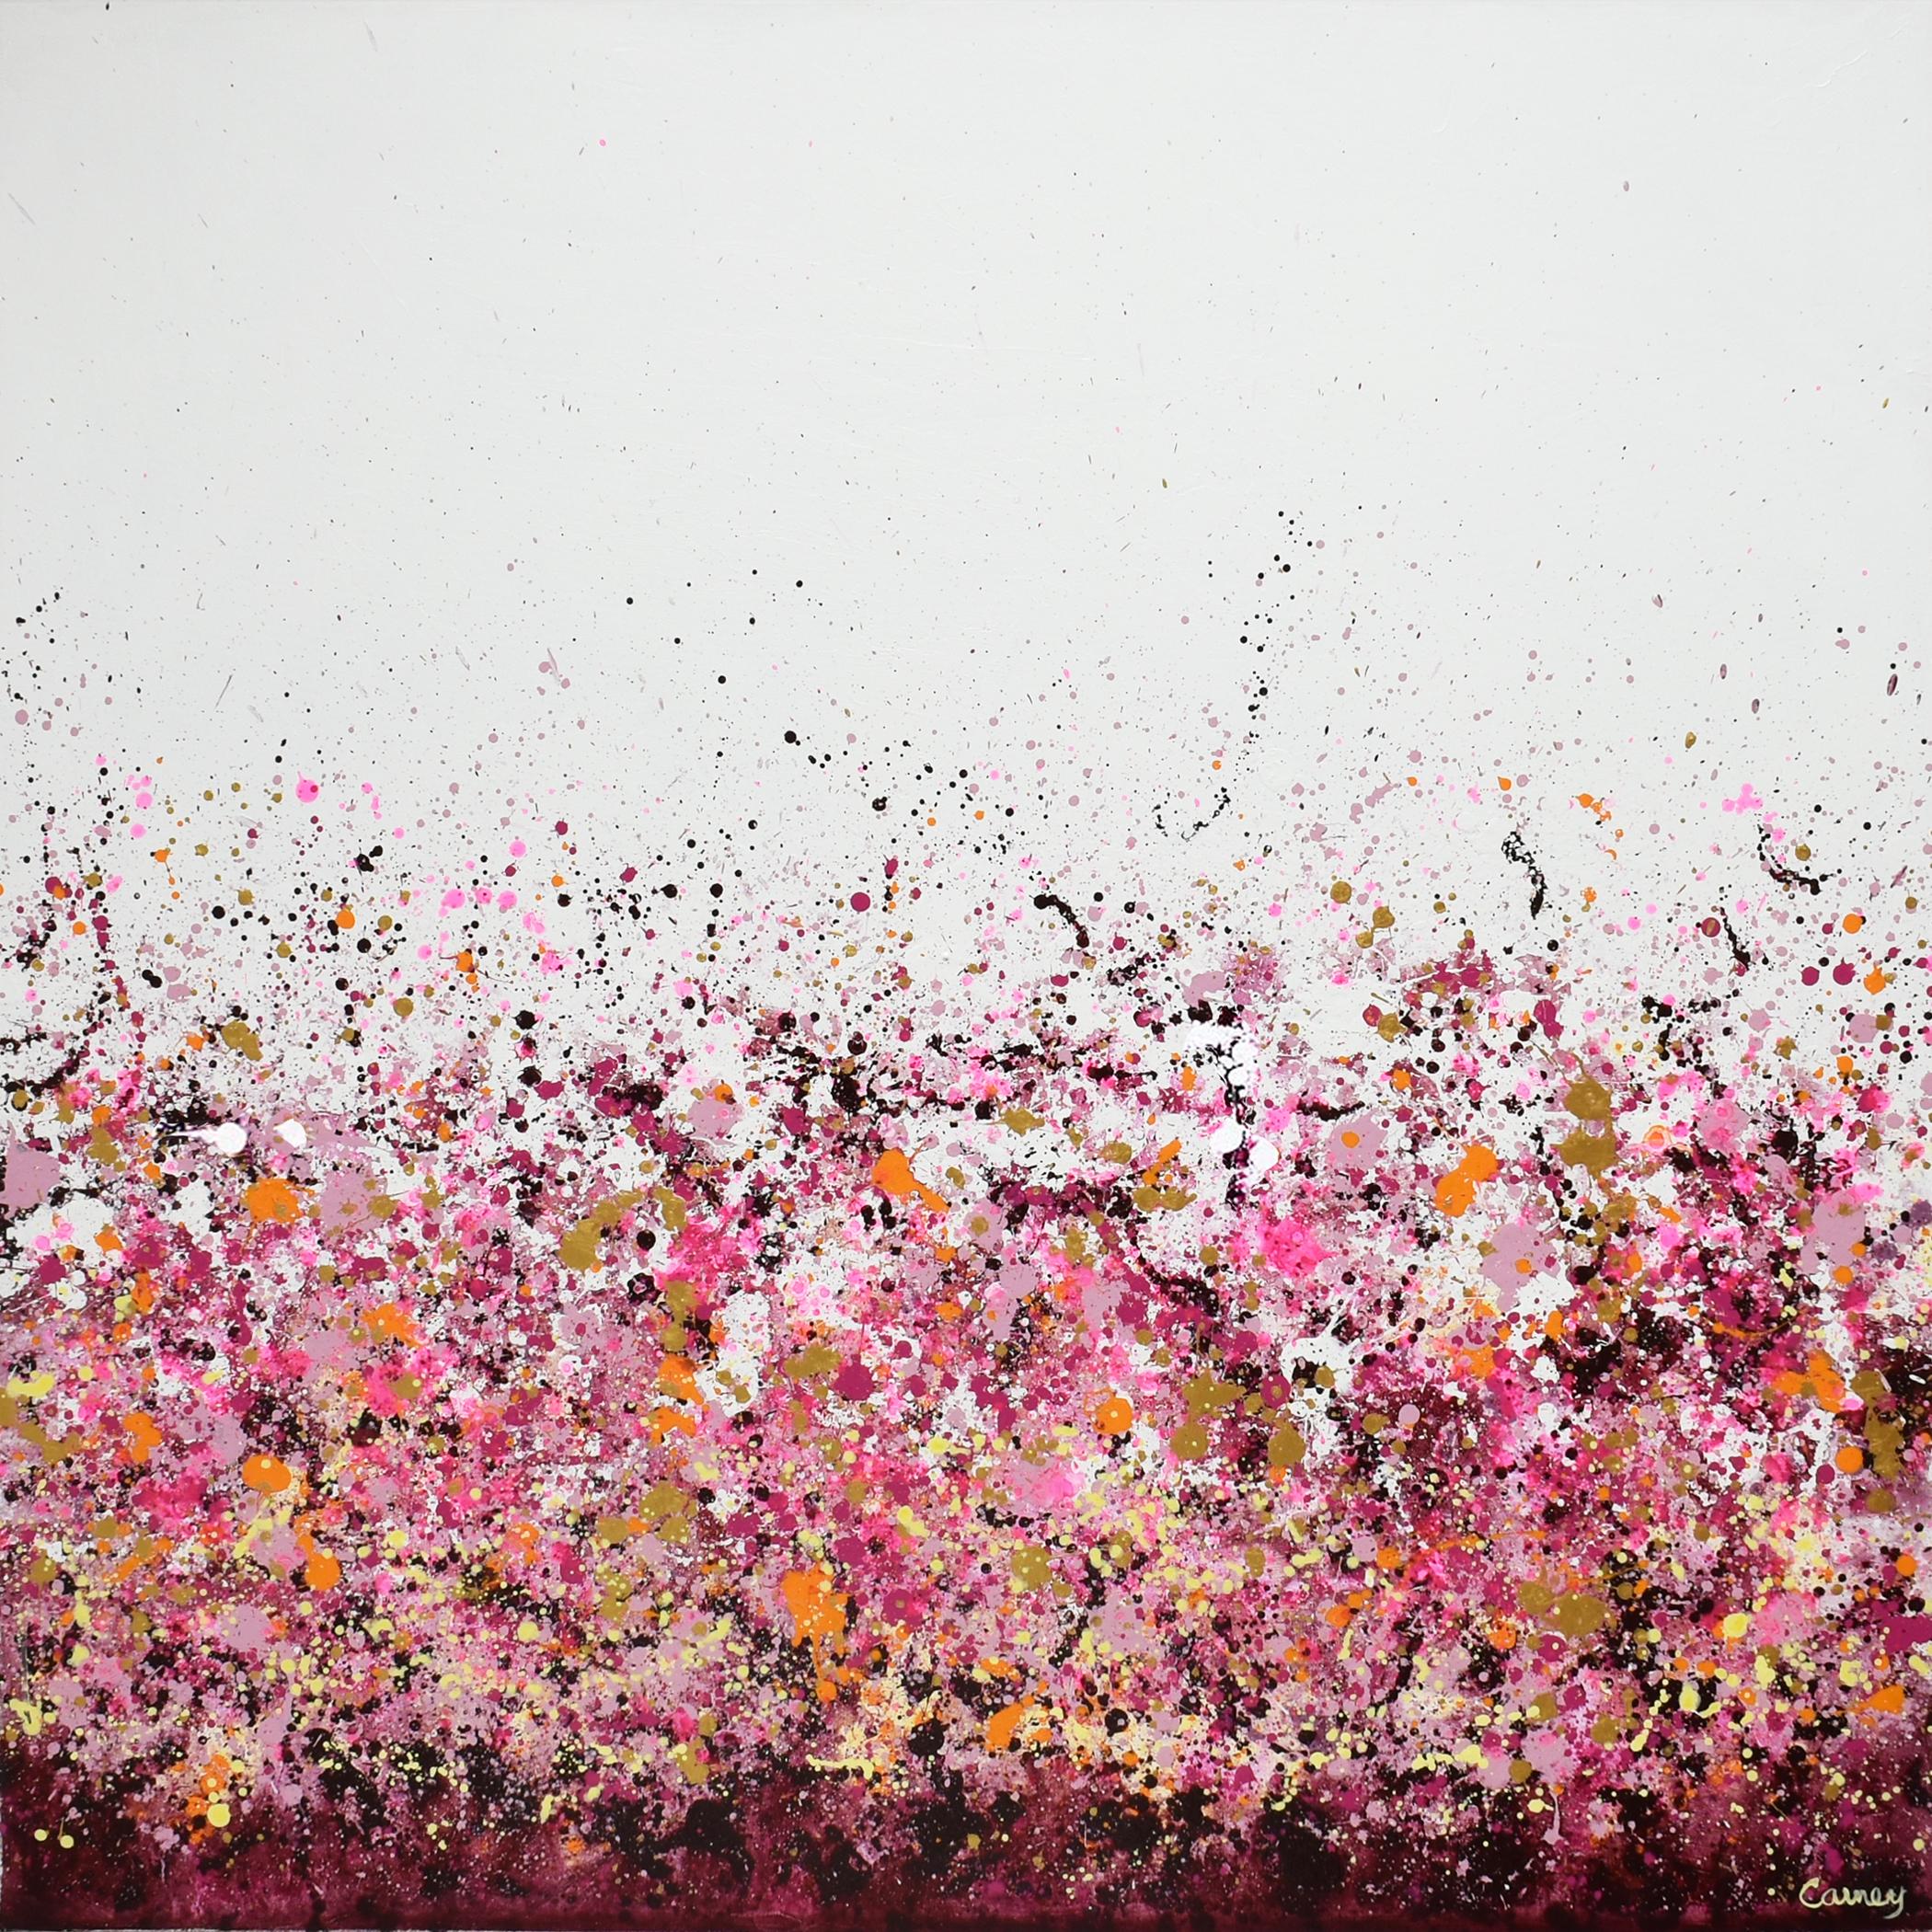 <p>Artist Comments<br />Energetic splatters of pink, magenta, orange and yellow ochre. Part of Lisa Carney's signature GeoFlora series, a collection of abstracted botanical paintings where she uses drip and splash techniques to suggest plant life,